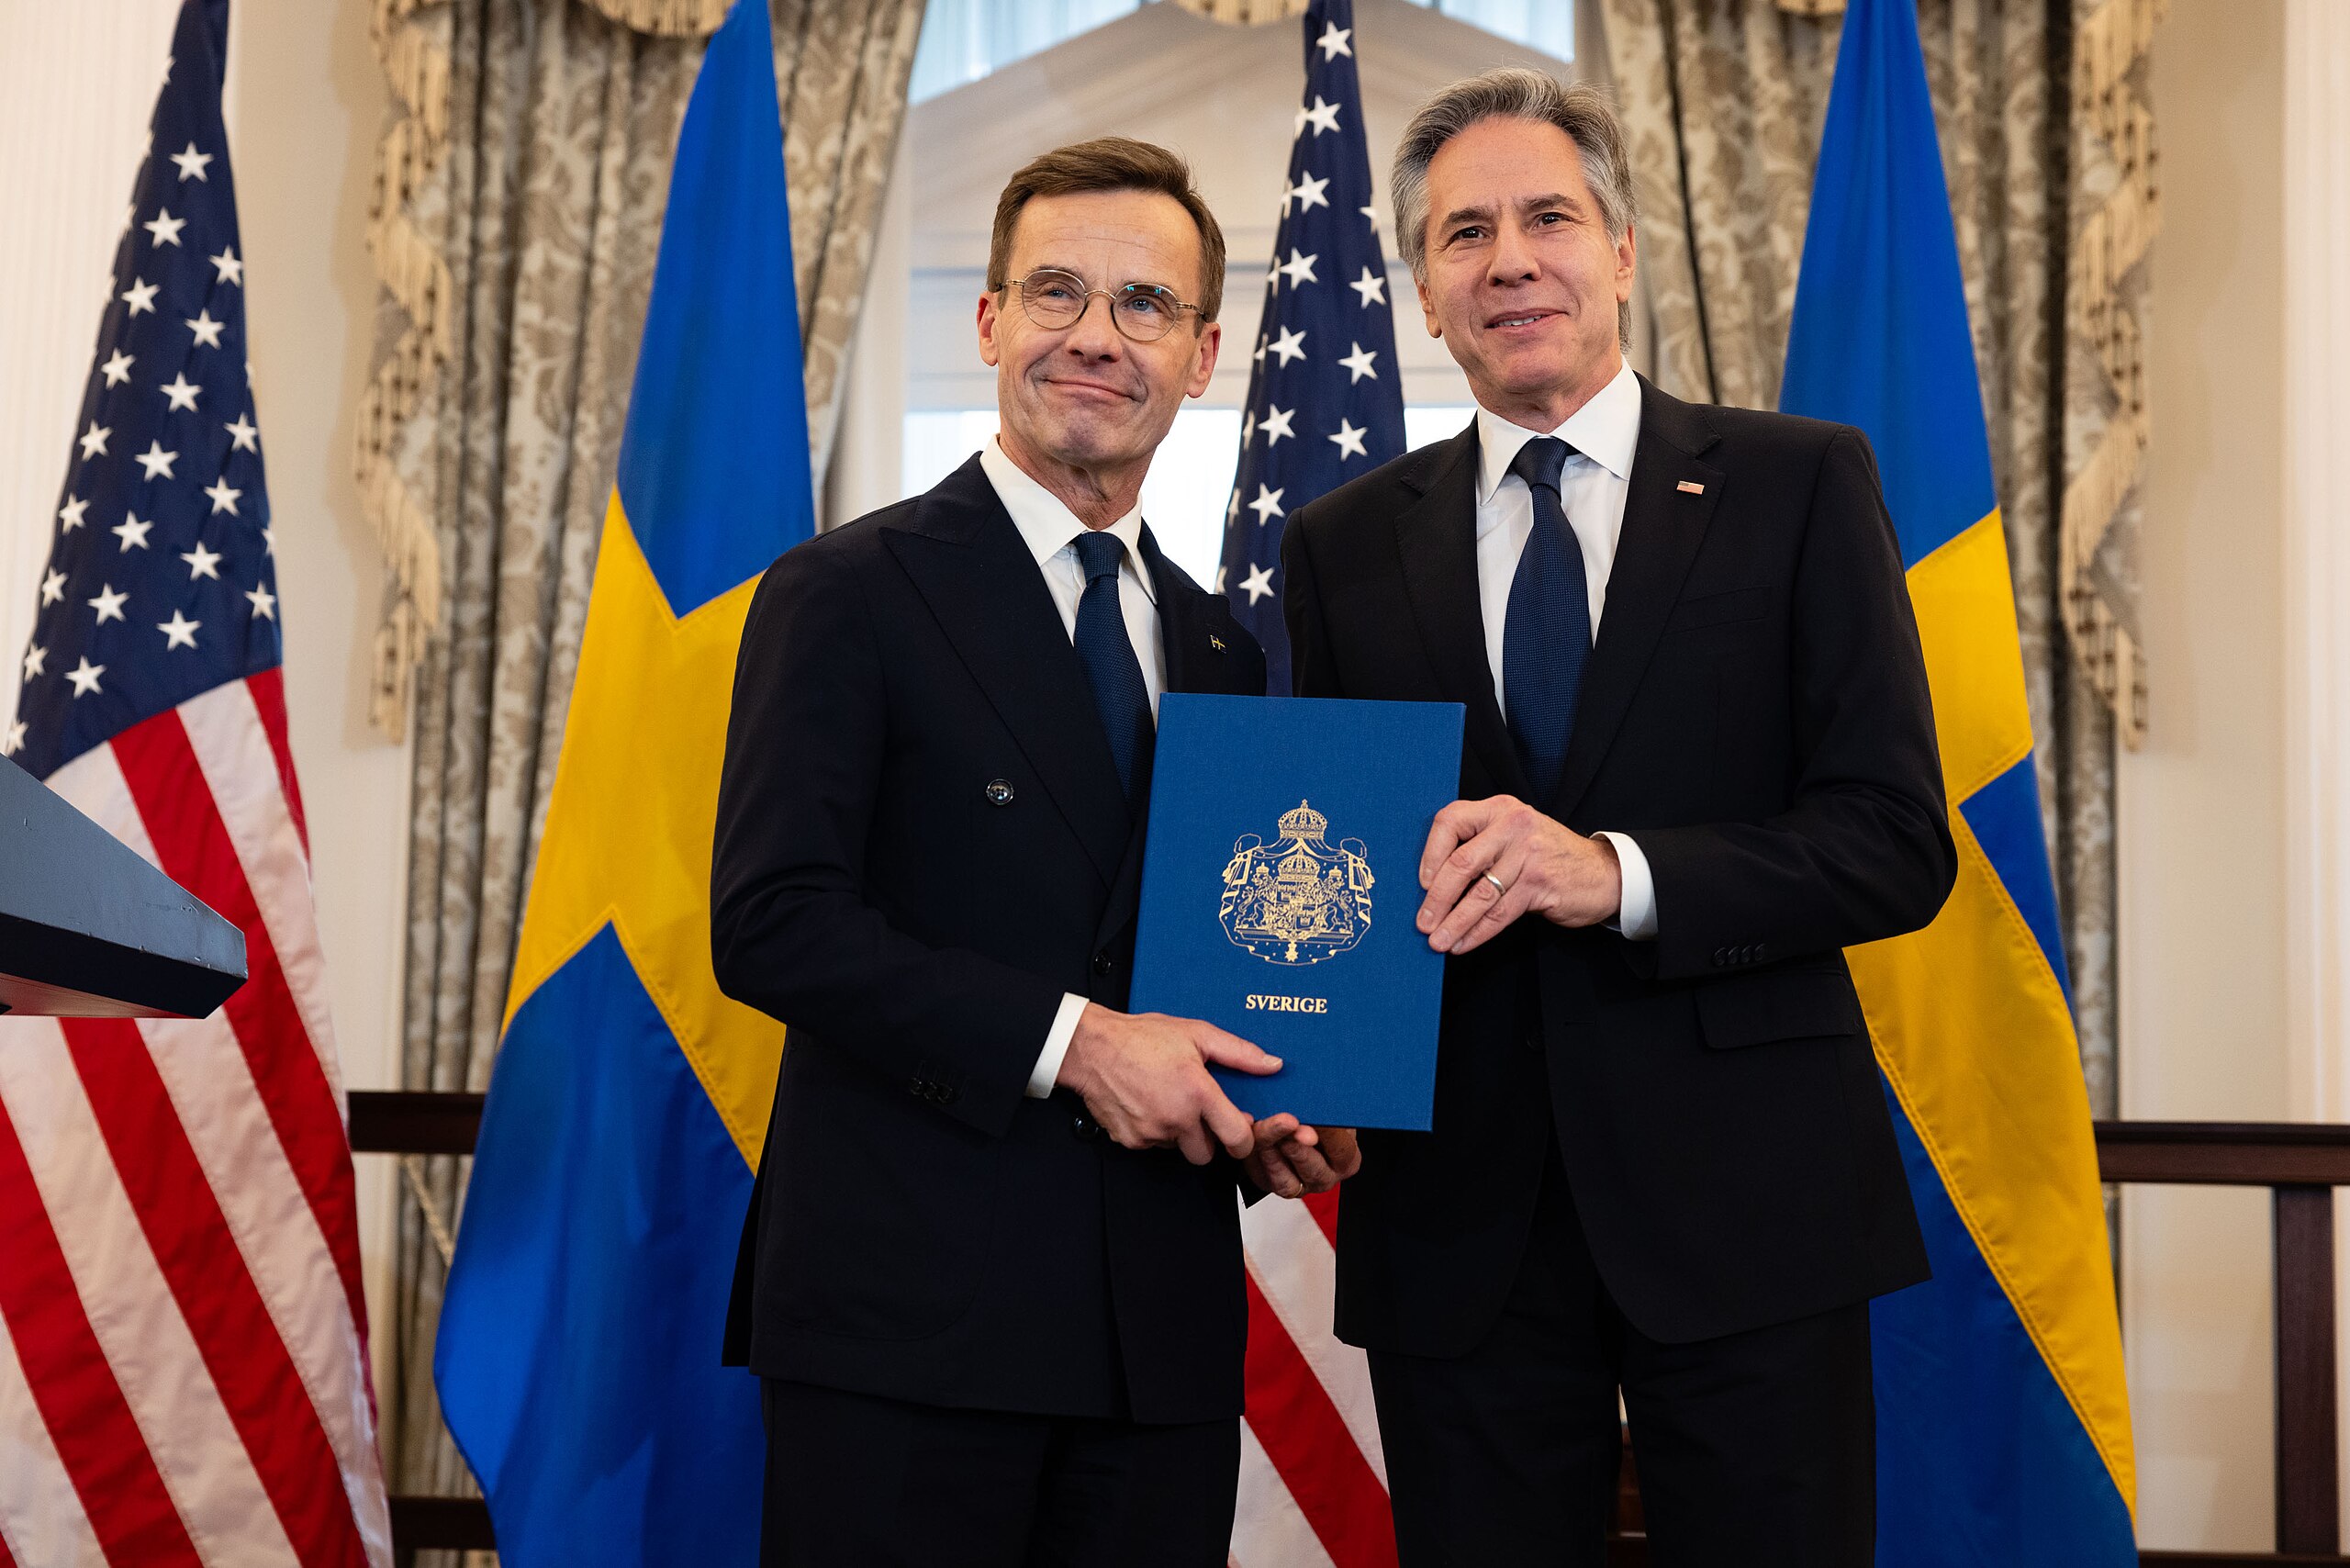 Secretary of State Antony J. Blinken, with Swedish Prime Minister Ulf Kristersson during the NATO ratification ceremony at the Department of State in Washington, D.C., as Sweden formally joins the North Atlantic alliance, on March 7, 2024. (Official State Department Photo by Chuck Kennedy)